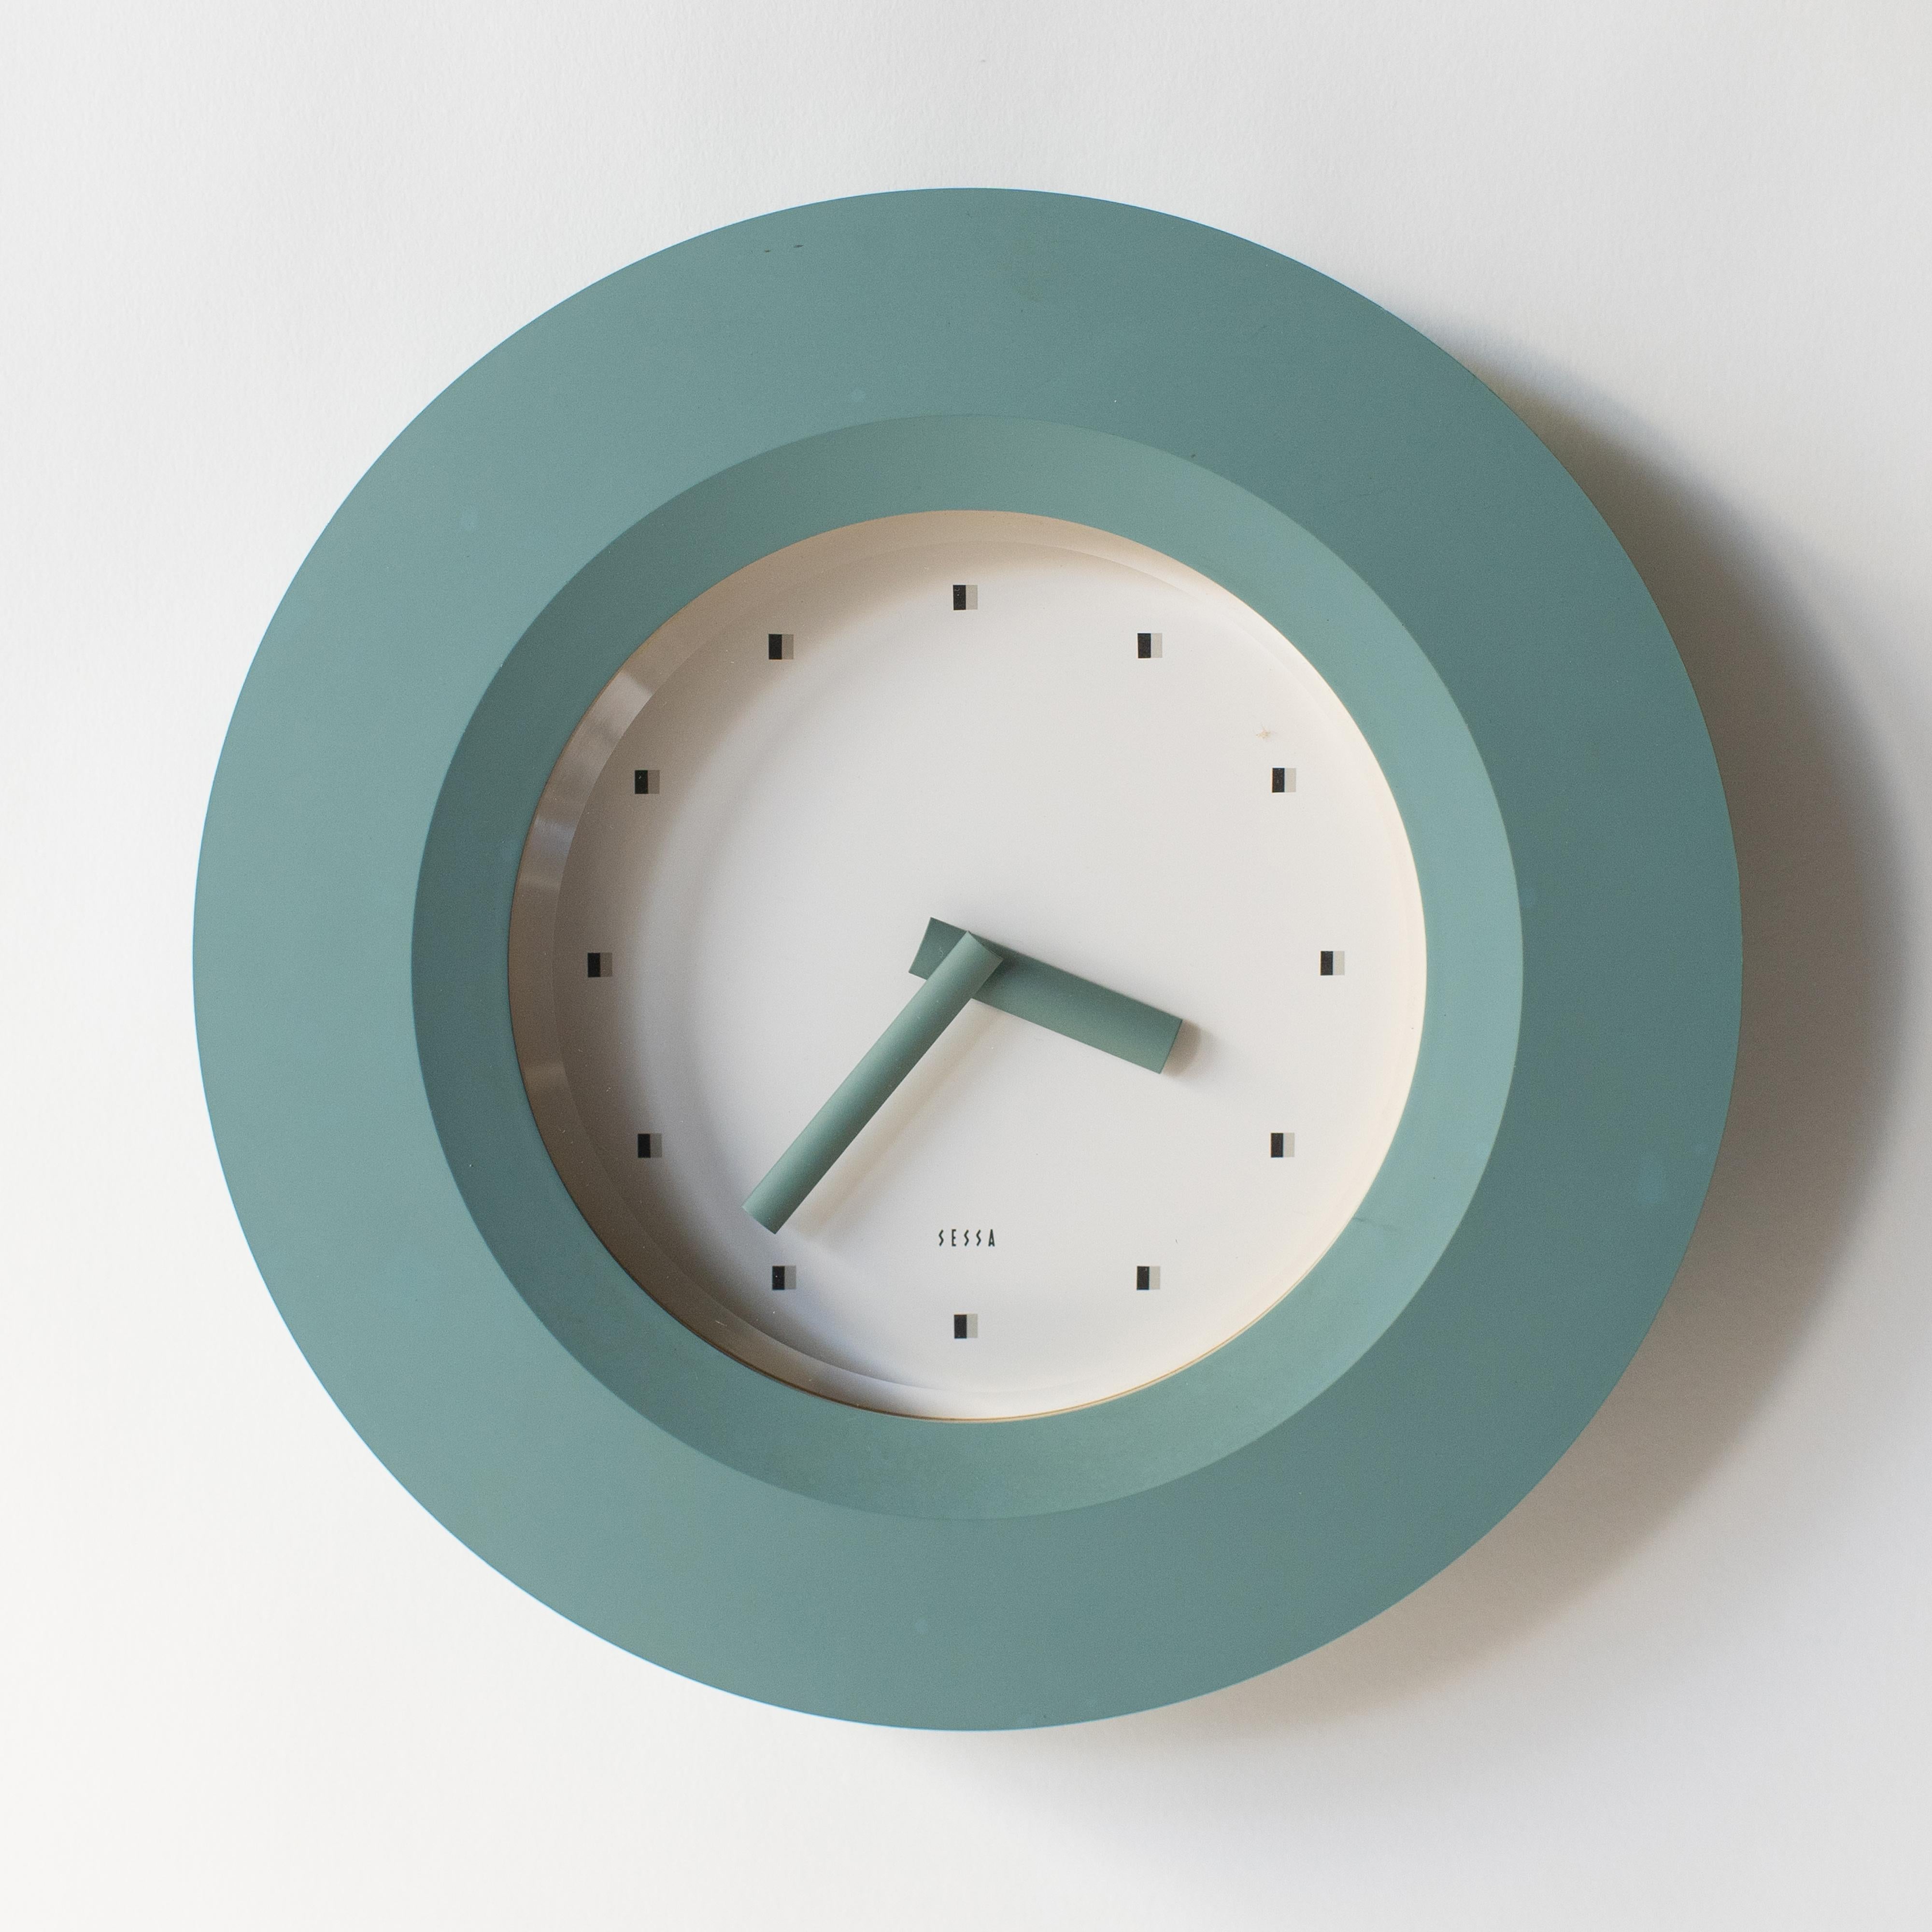 Wall clock by Sessa. Takashi Kato designed a lot of clocks in the 1980s-1990s. Some of clock collections were released from Neos Lorenz in European Market. Which sold together with Natherie du Pastier and George Sowden works.